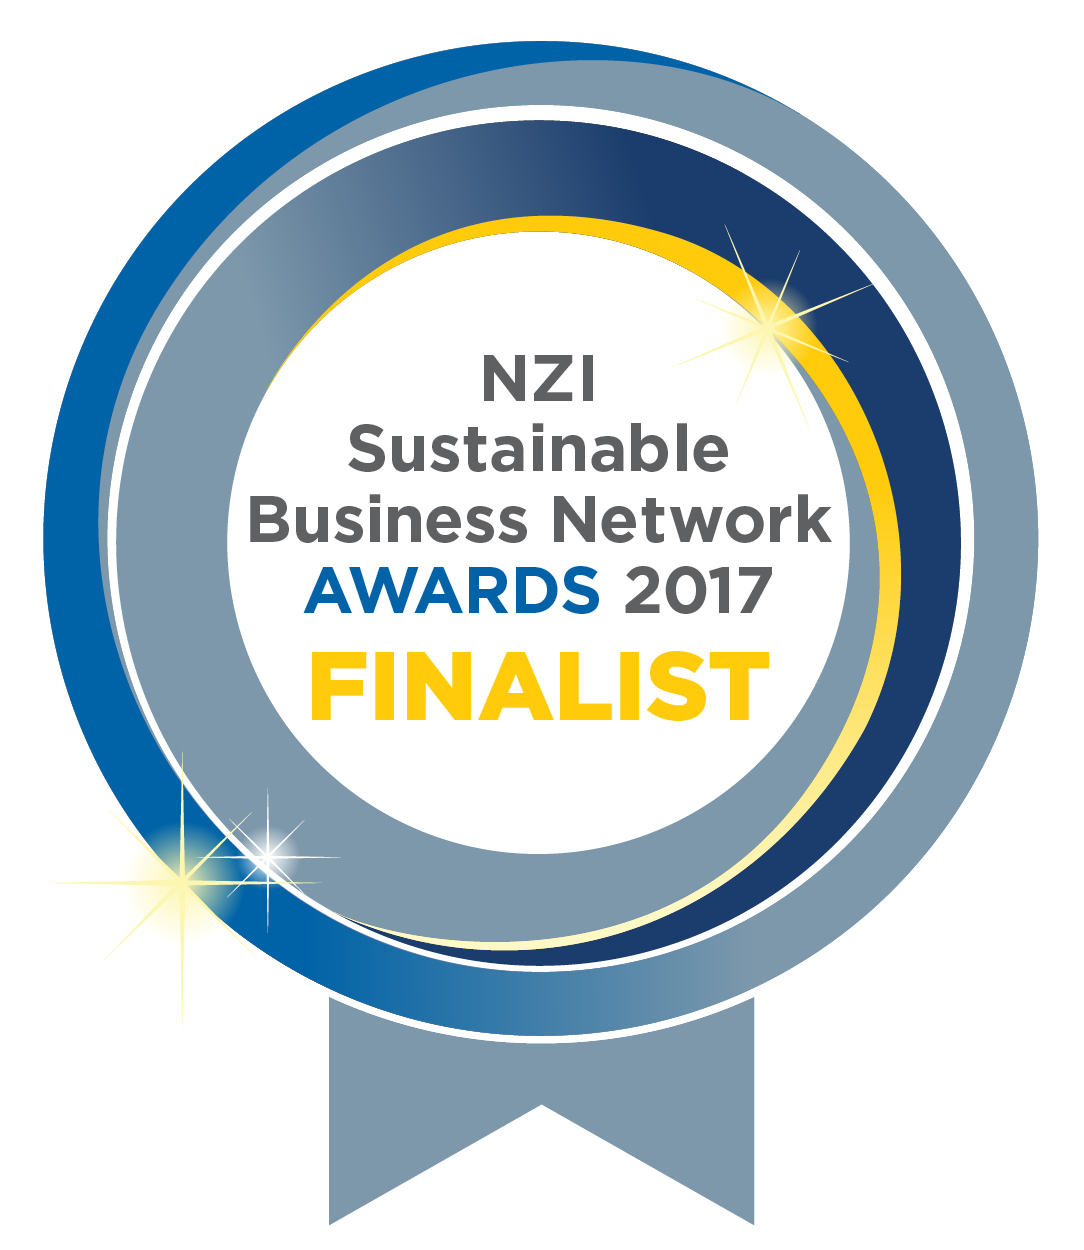 TMH A Finalist in the NZI Sustainable Business Network Awards